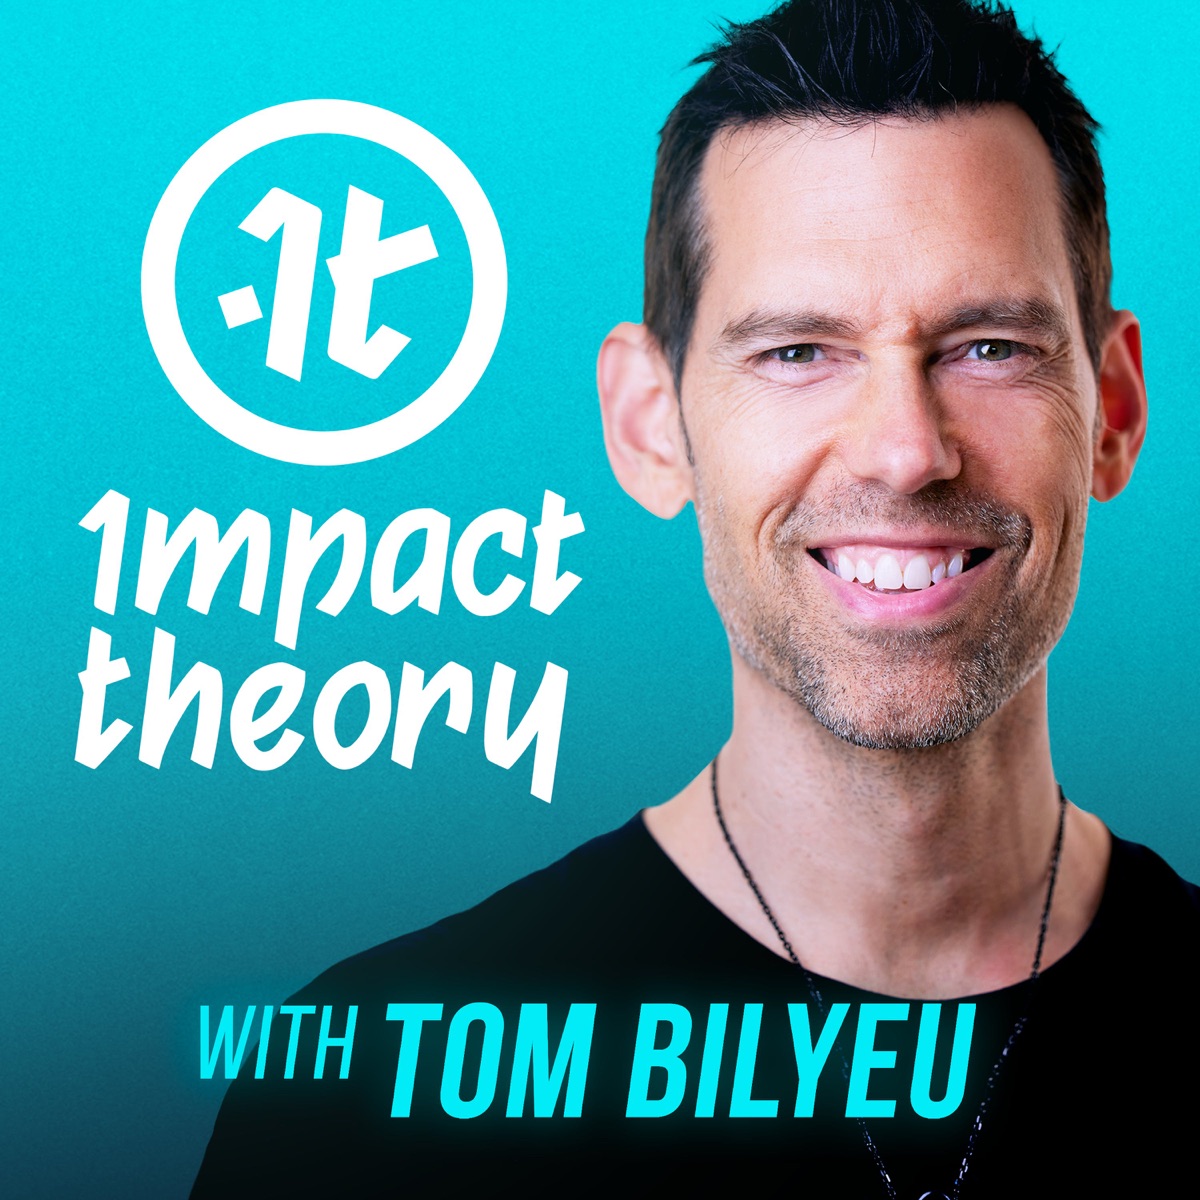 12 Saal Boy 10 Saal Girl Sexy Sex Video Hd New - Impact Theory with Tom Bilyeu - Podcast â€“ Podtail